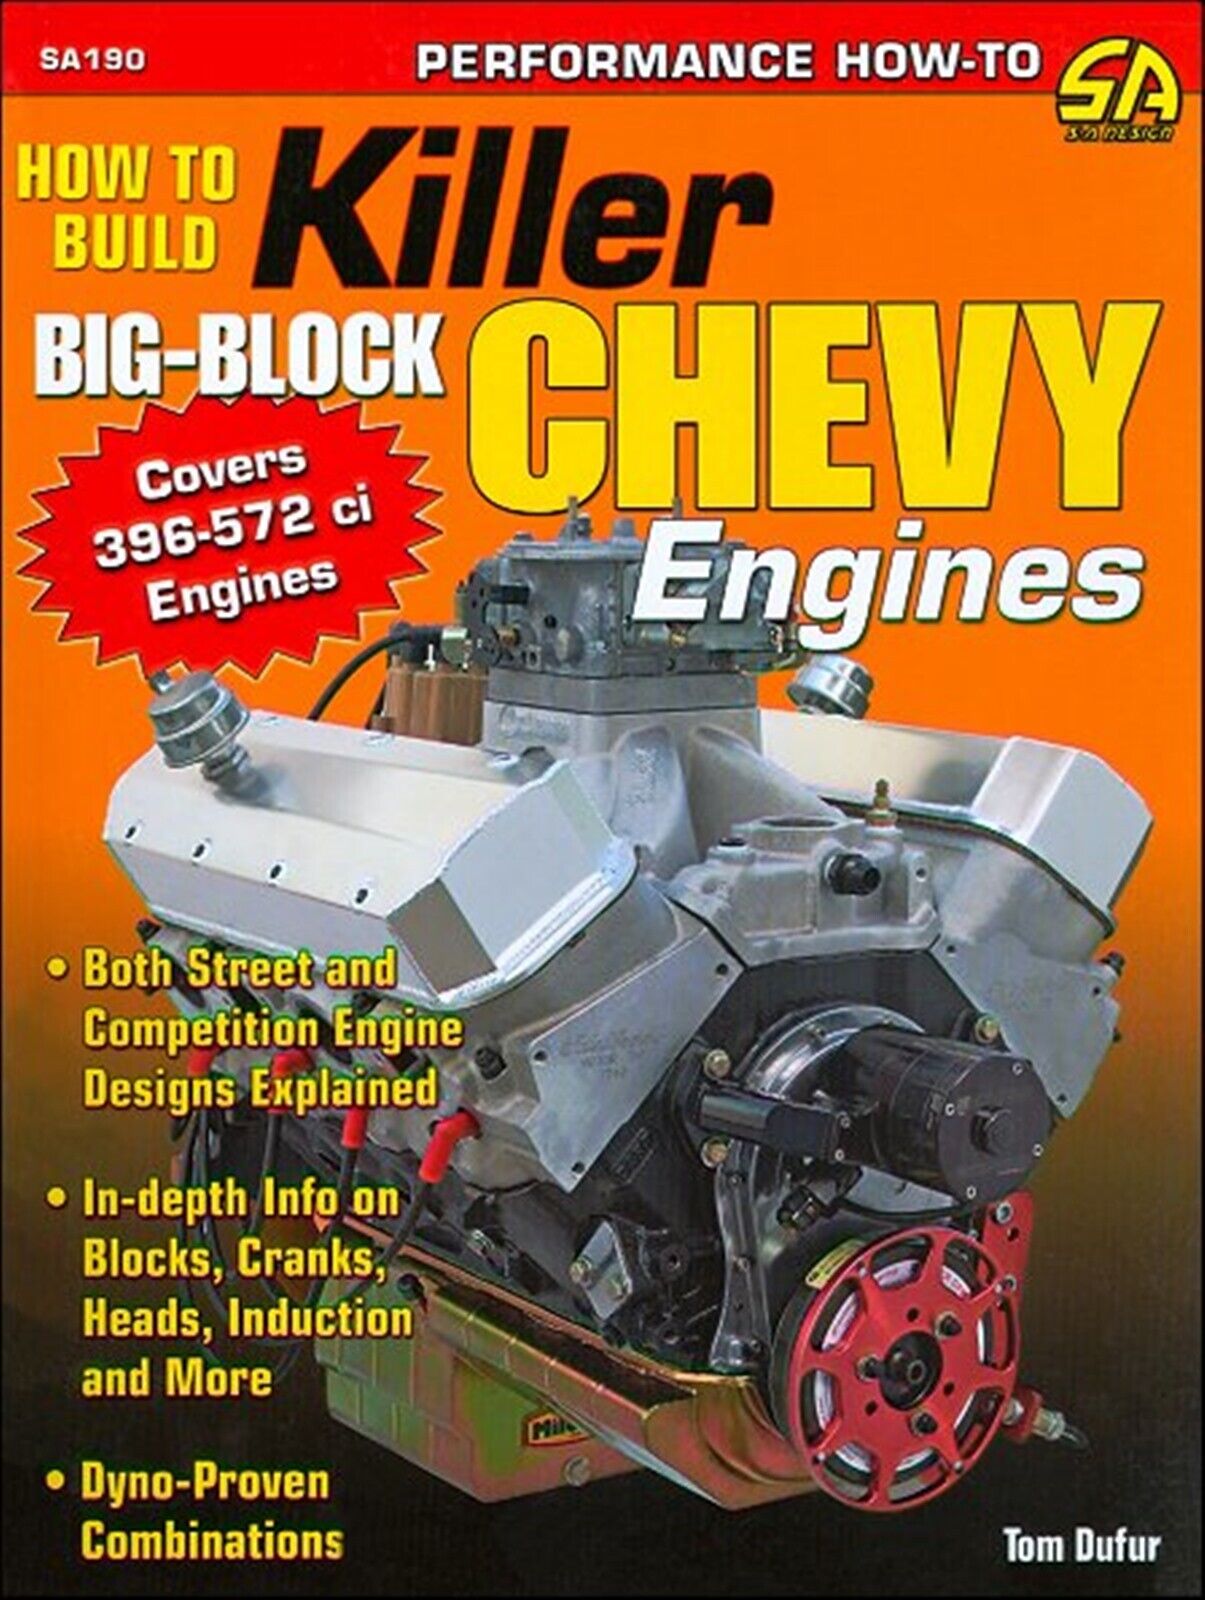 How To Build Killer Big-Block Chevy Engines